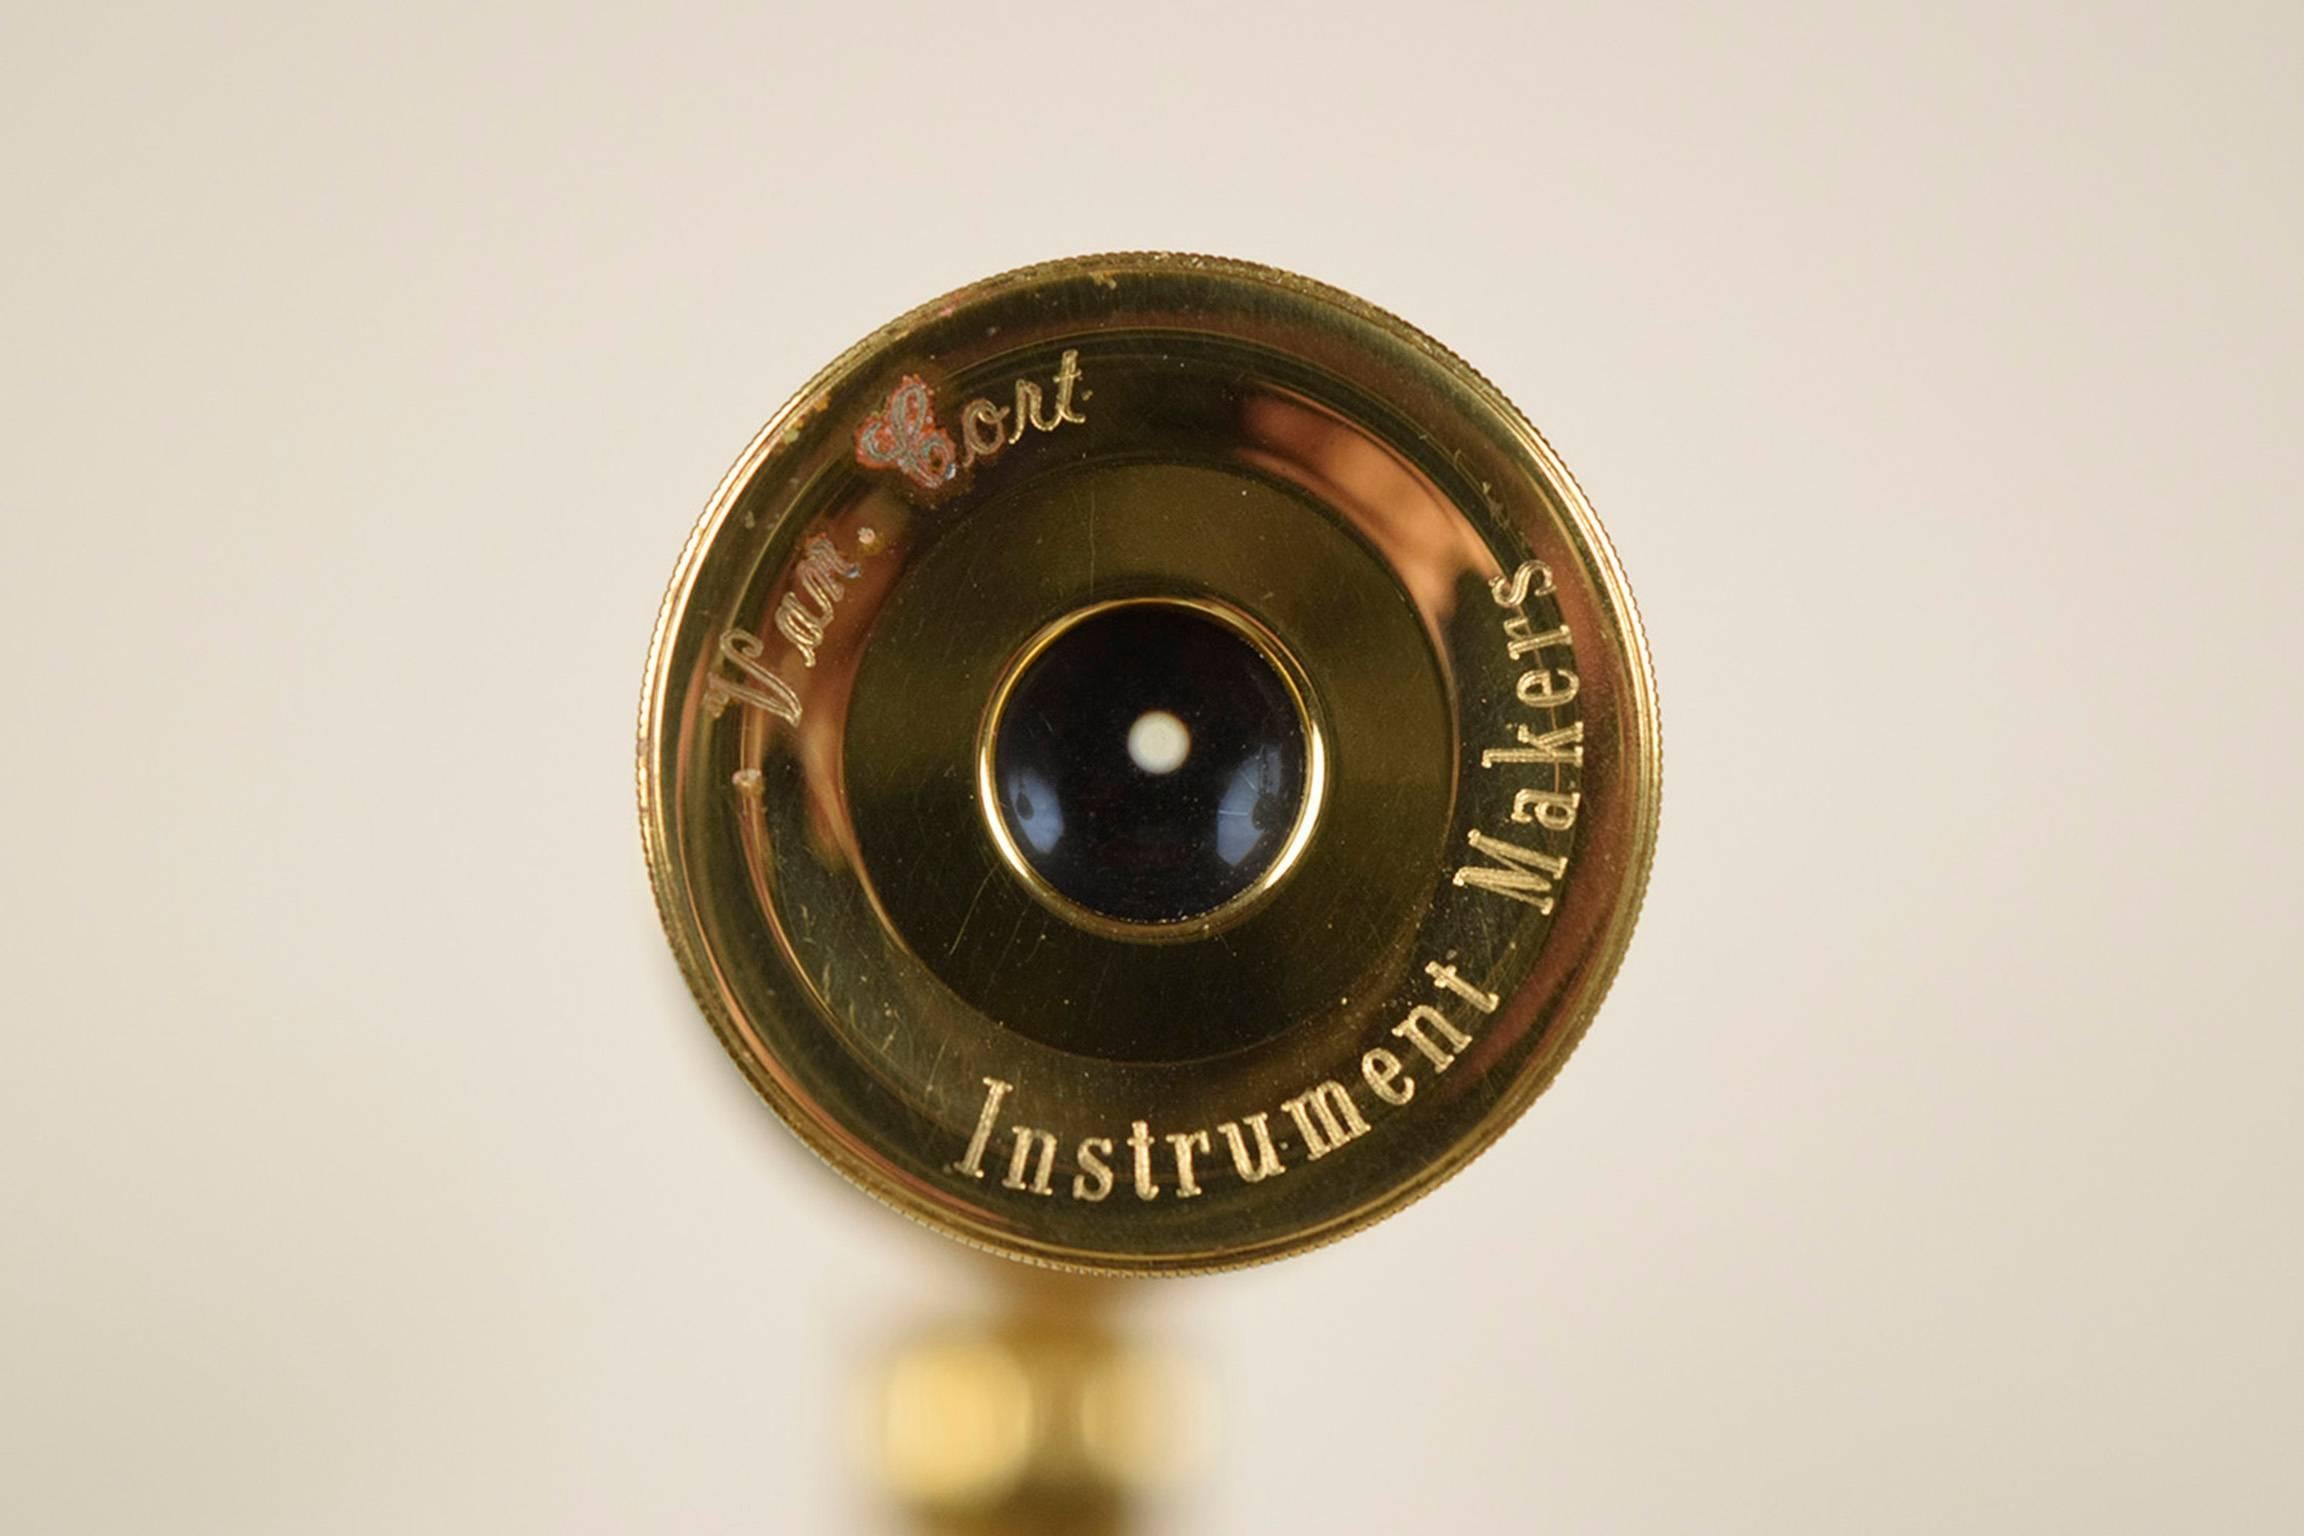 This is a 1970s Van Cort Instrument Makers Telescope. The telescope and mid section are crafted from brass and sits upon a tripod made from wood finished in a mahogany color stain. This instrument to see the stars of our universe is ready to be used